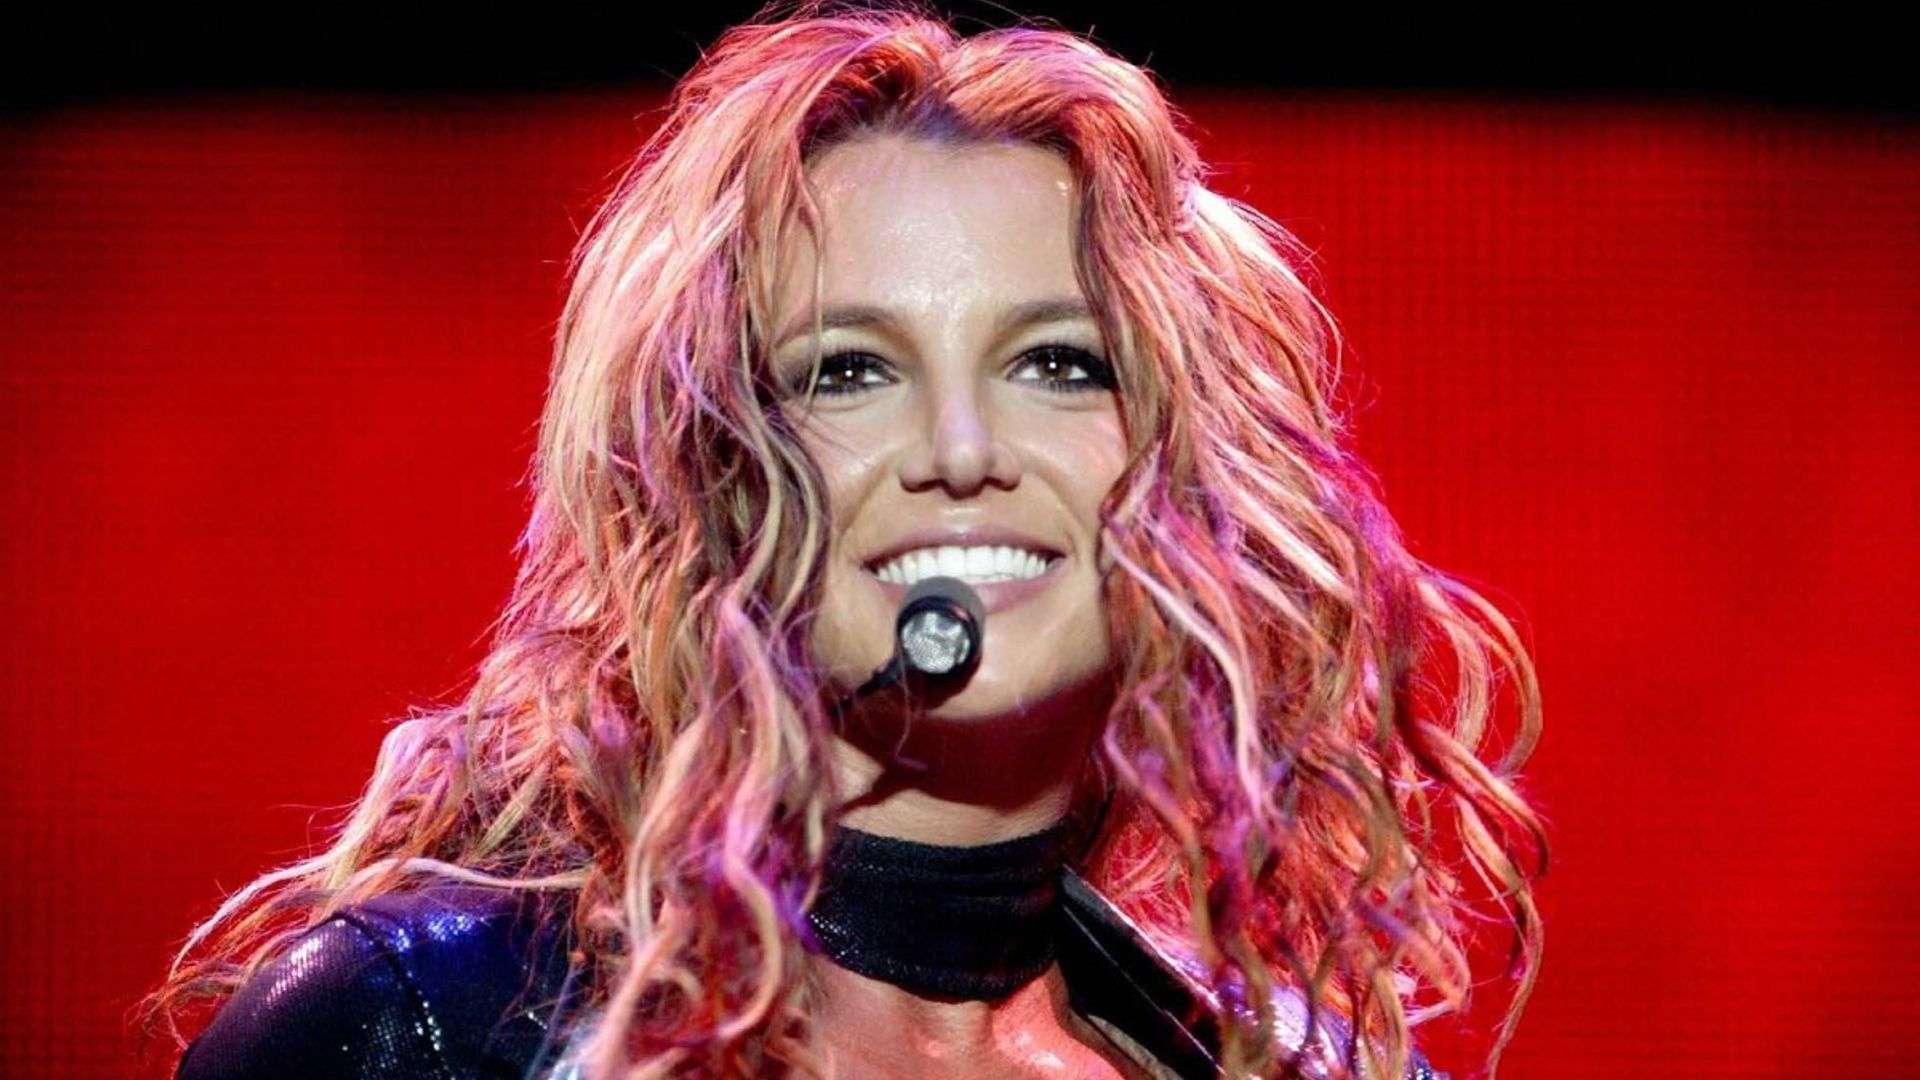 Britney Spears accuses family of 'humiliation' in heartbreaking message